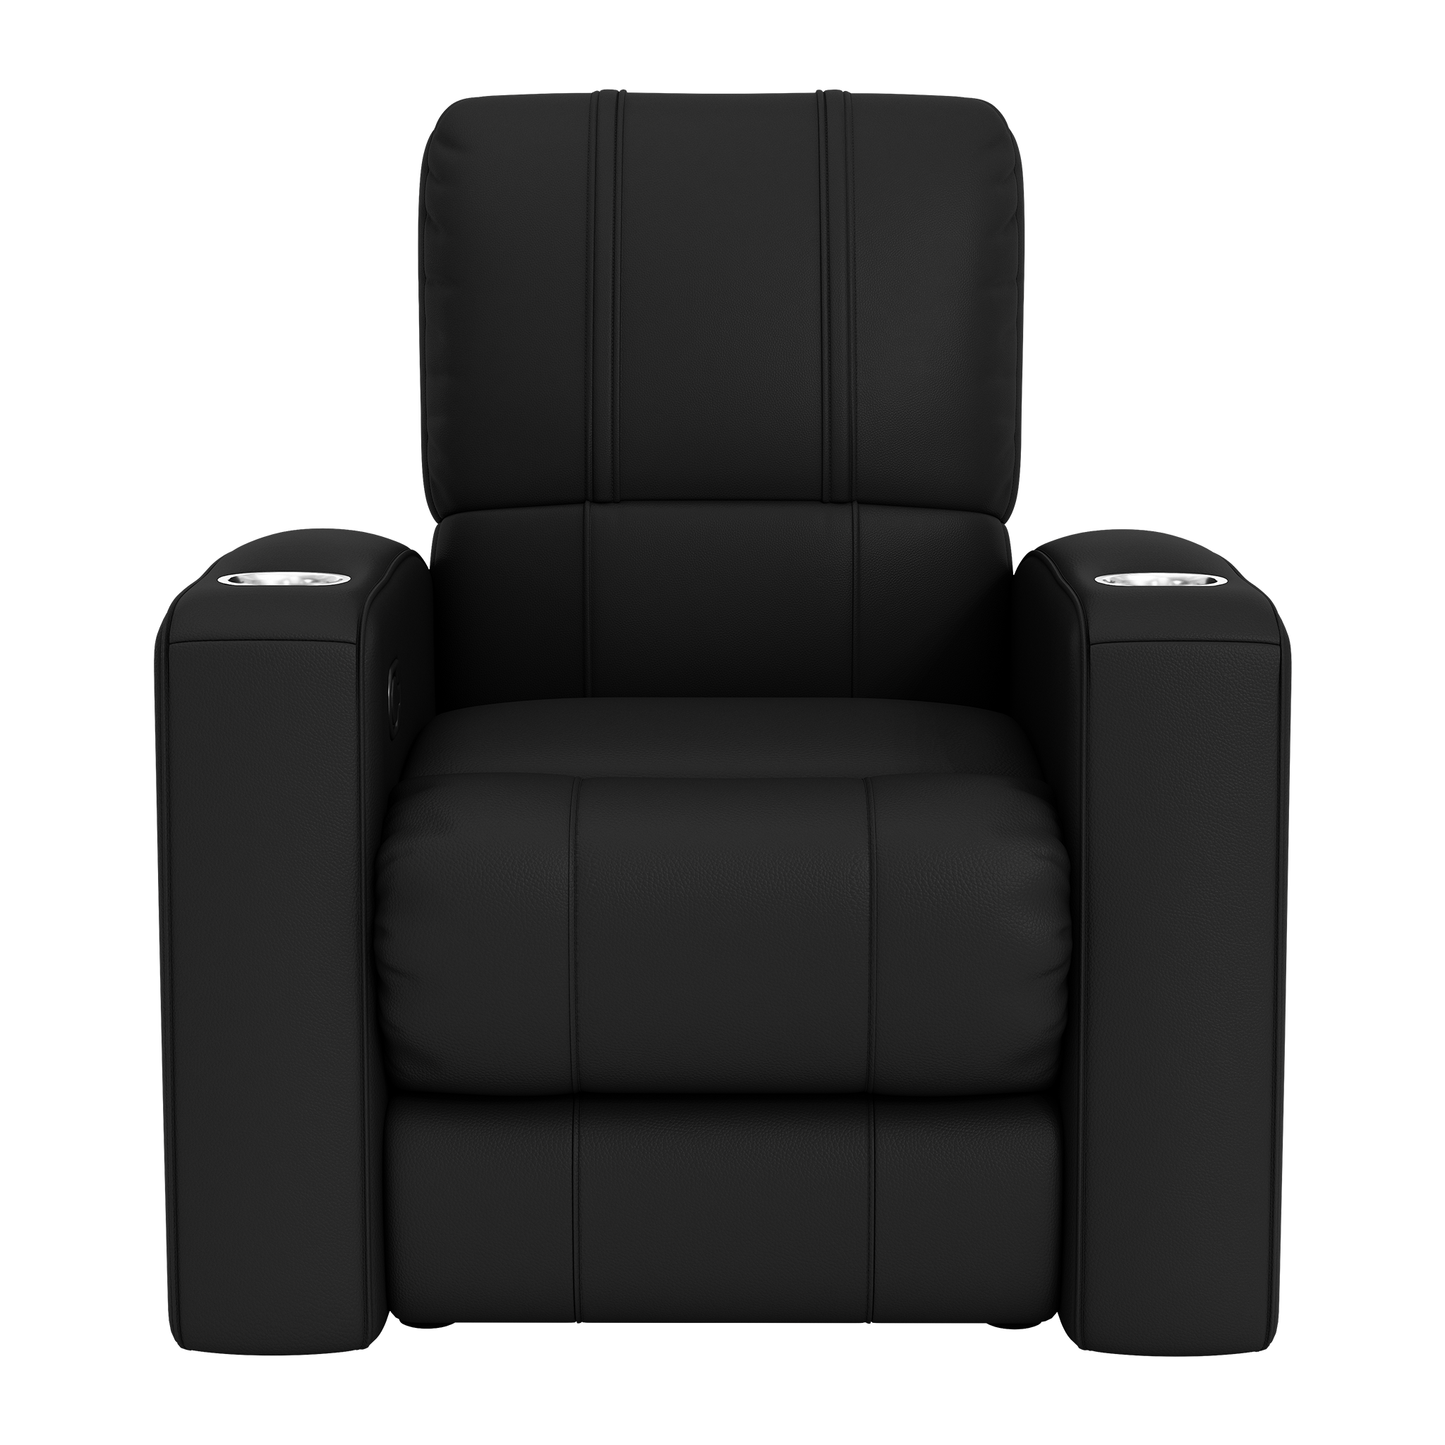 Relax Home Theater Recliner with C8R Logo